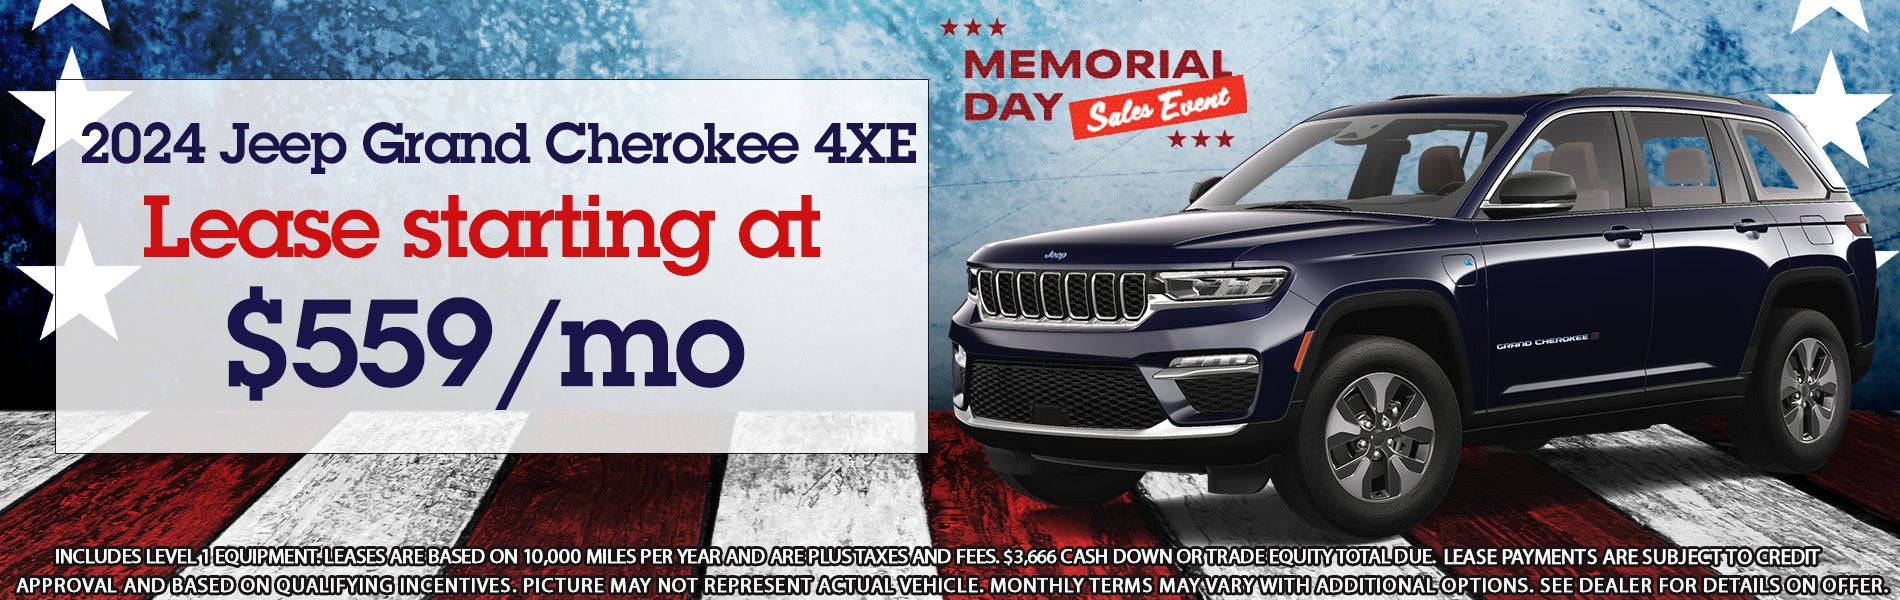 2024 Jeep Grand Cherokee 4XE lease starting at $559/mo